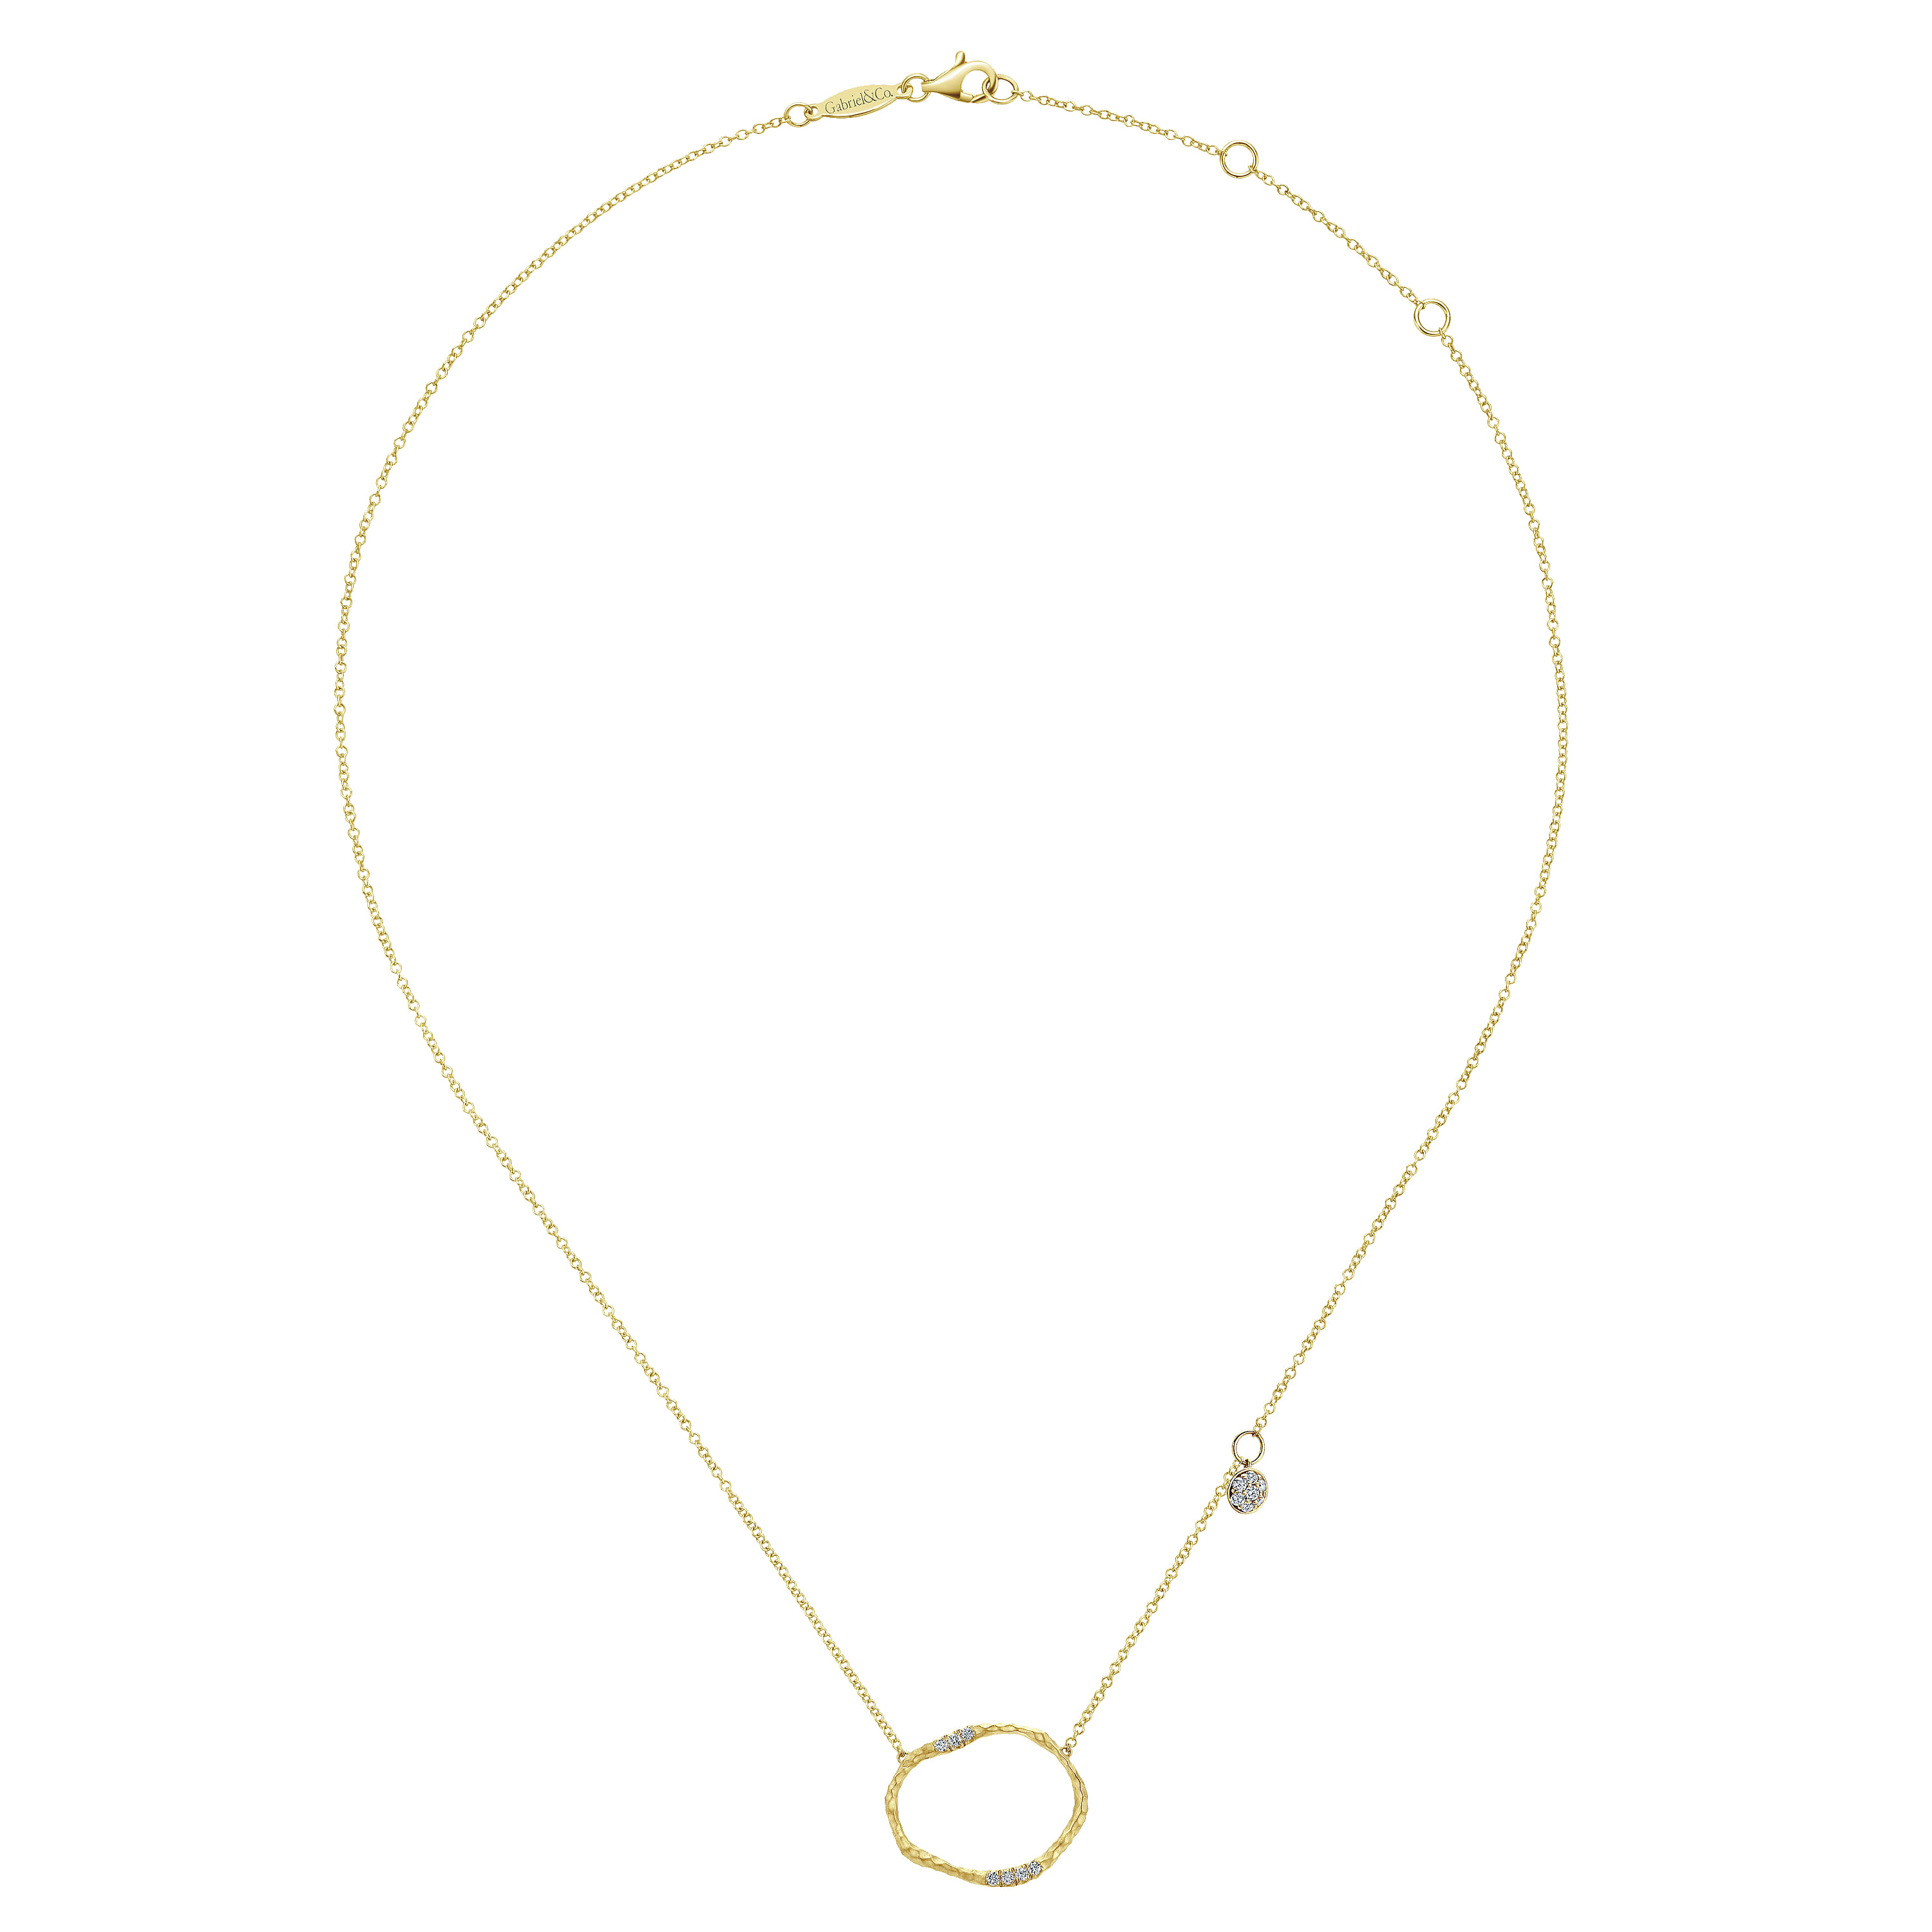 Hammered 14K Yellow Gold Circular Pendant Necklace with Diamonds